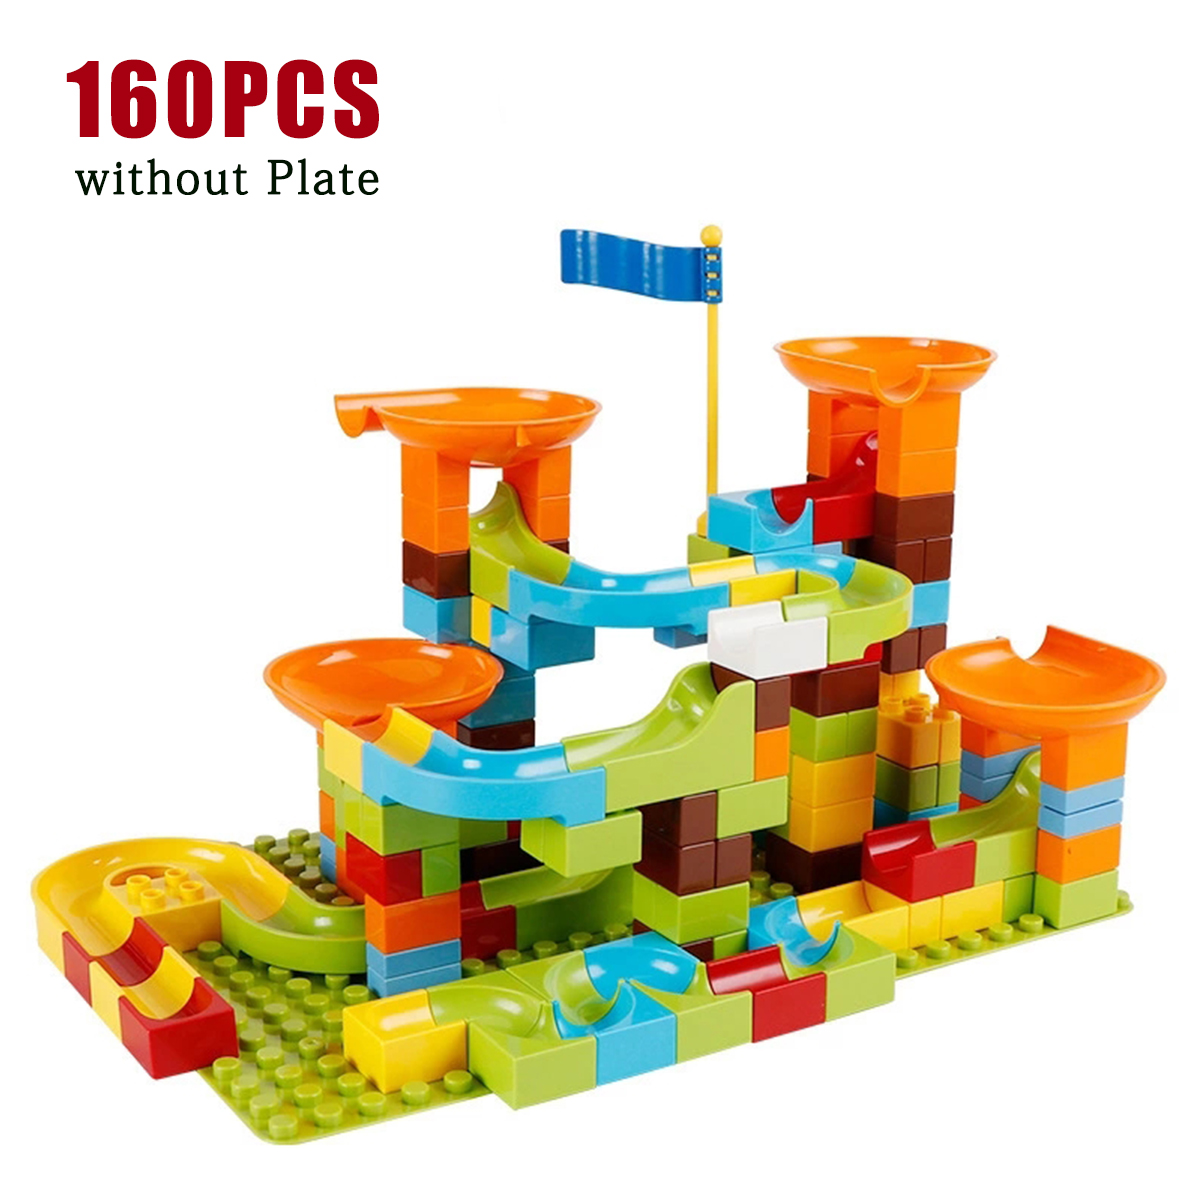 8081160Pcs-DIY-Assembly-Kids-Game-Play-Building-Blocks-Toys-for-Kids-Gift-1678176-5